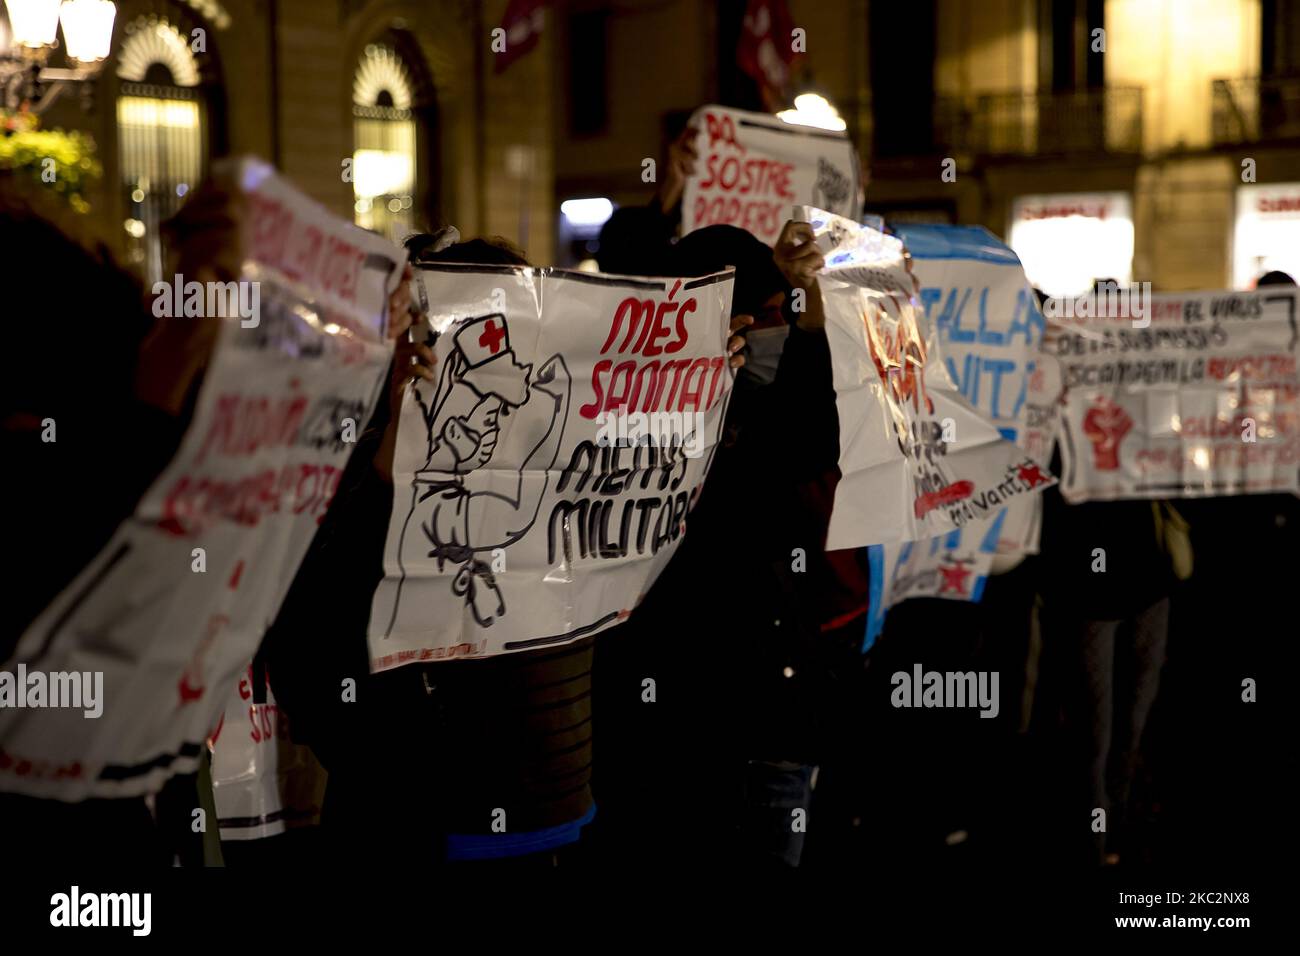 Members of the People's Unity Candidacy (CUP), the Catalan left-wing pro-independence party, demonstrate against the curfew, which they consider to be a militarisation of society and in favour of public health to fight the pandemic of the Covid-19 Coronavirus during the second night of curfew. In Barcelona, Catalonia, Spain on 26 October 2020. (Photo by Albert Llop/NurPhoto) Stock Photo